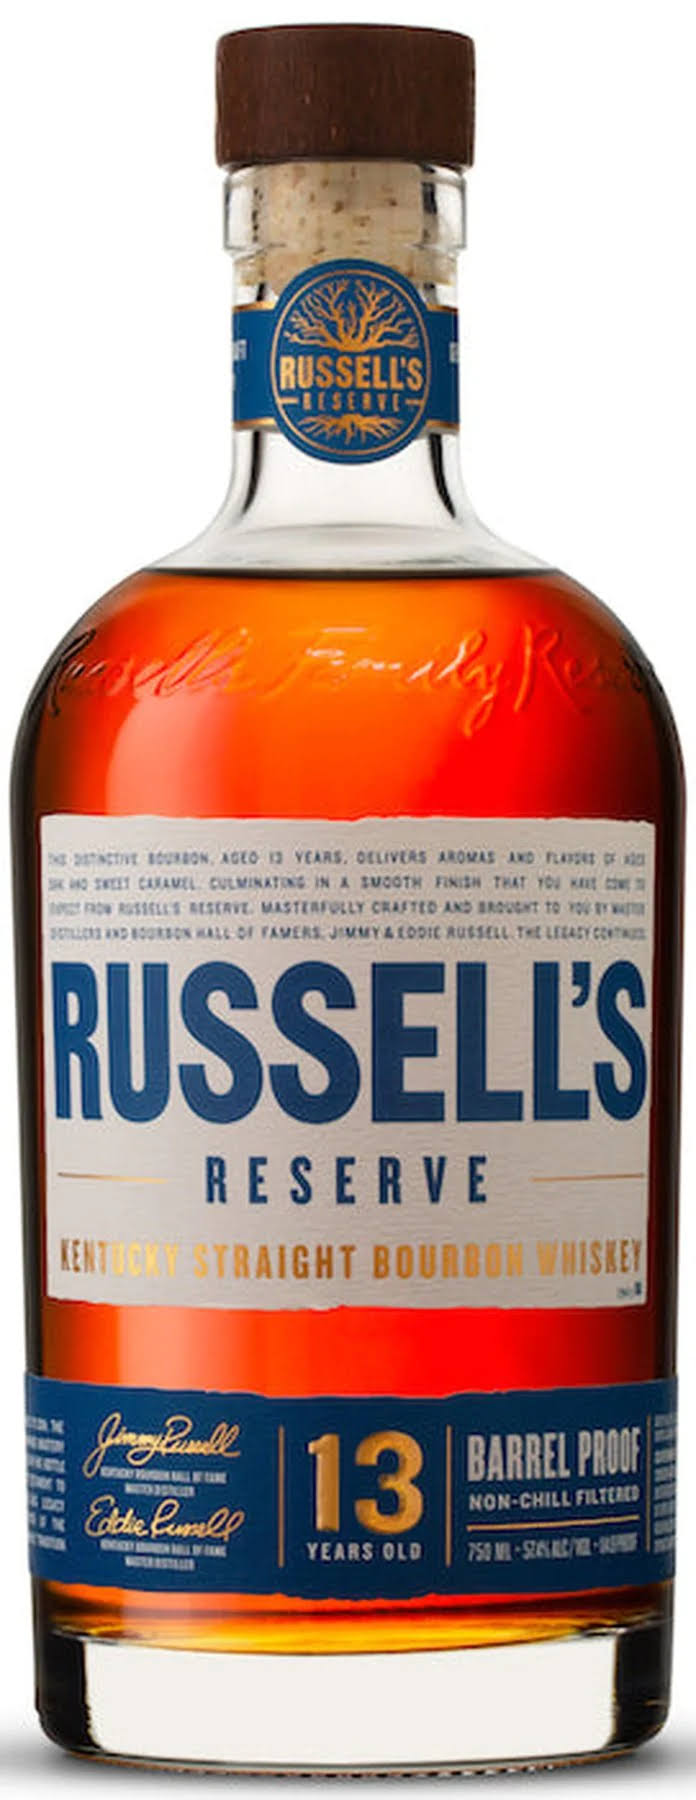 Russell's Reserve Bourbon 13 Year Barrel Proof 750ml